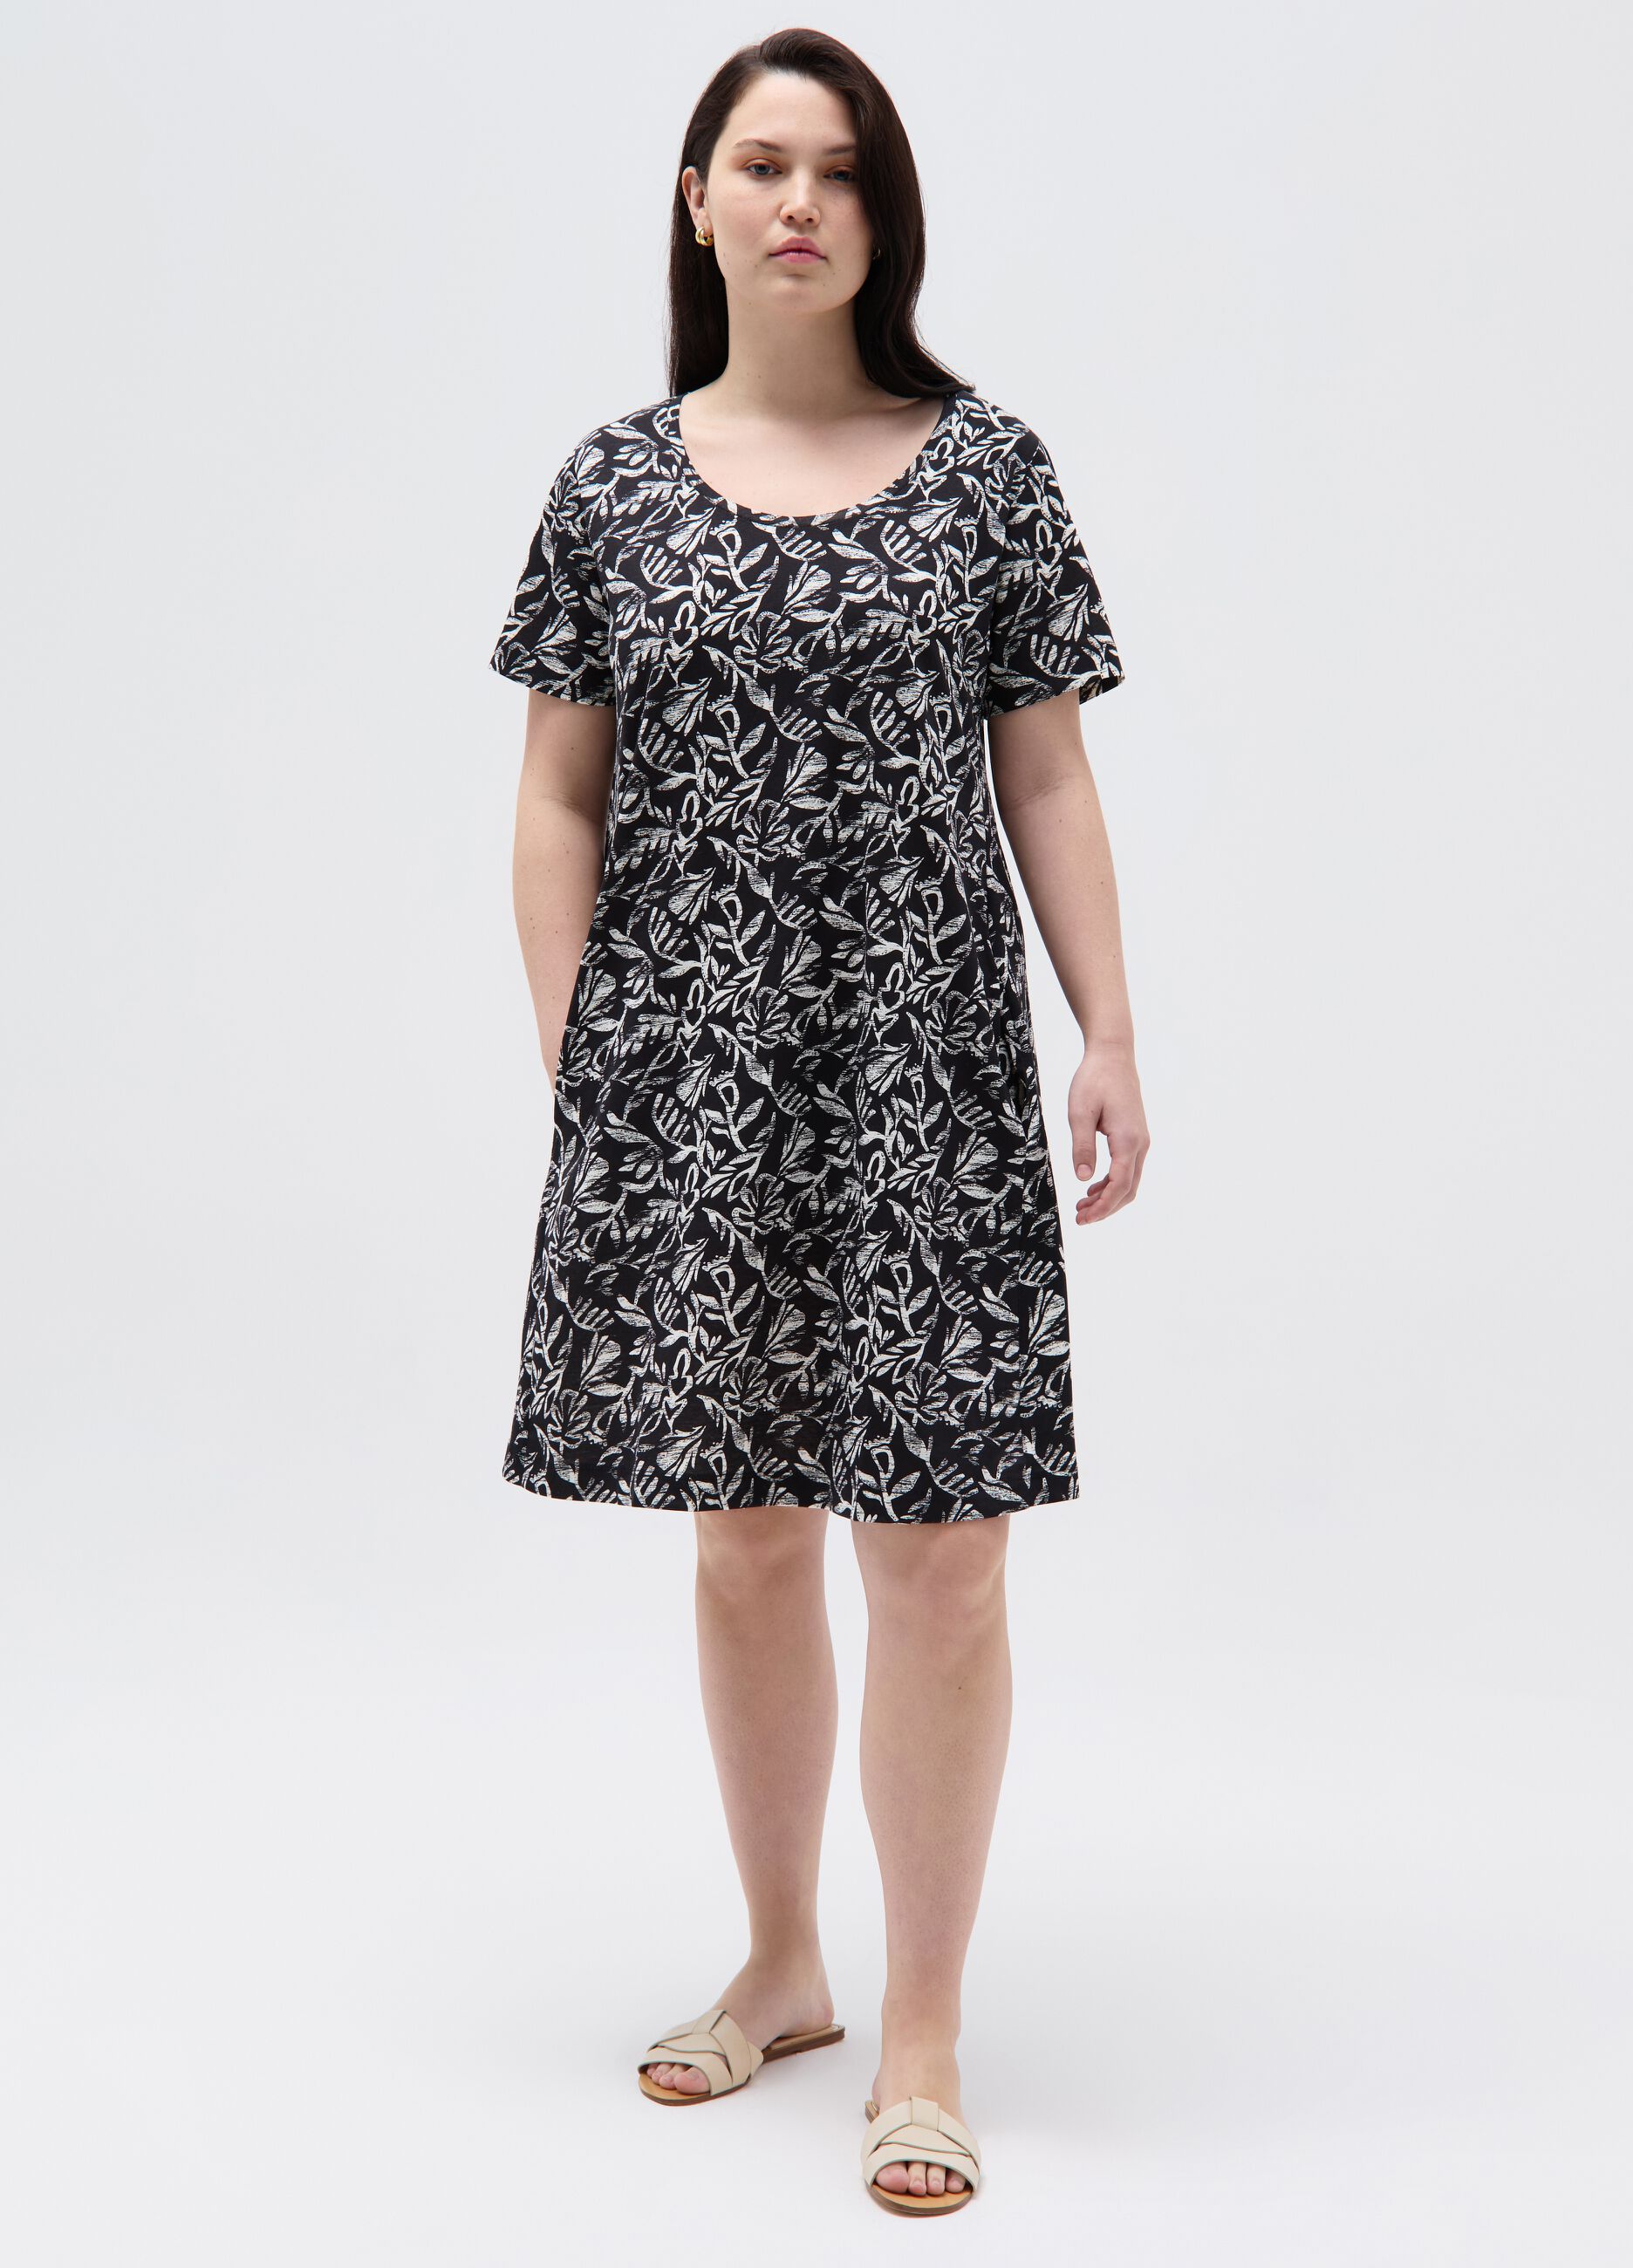 Curvy short dress with all-over print